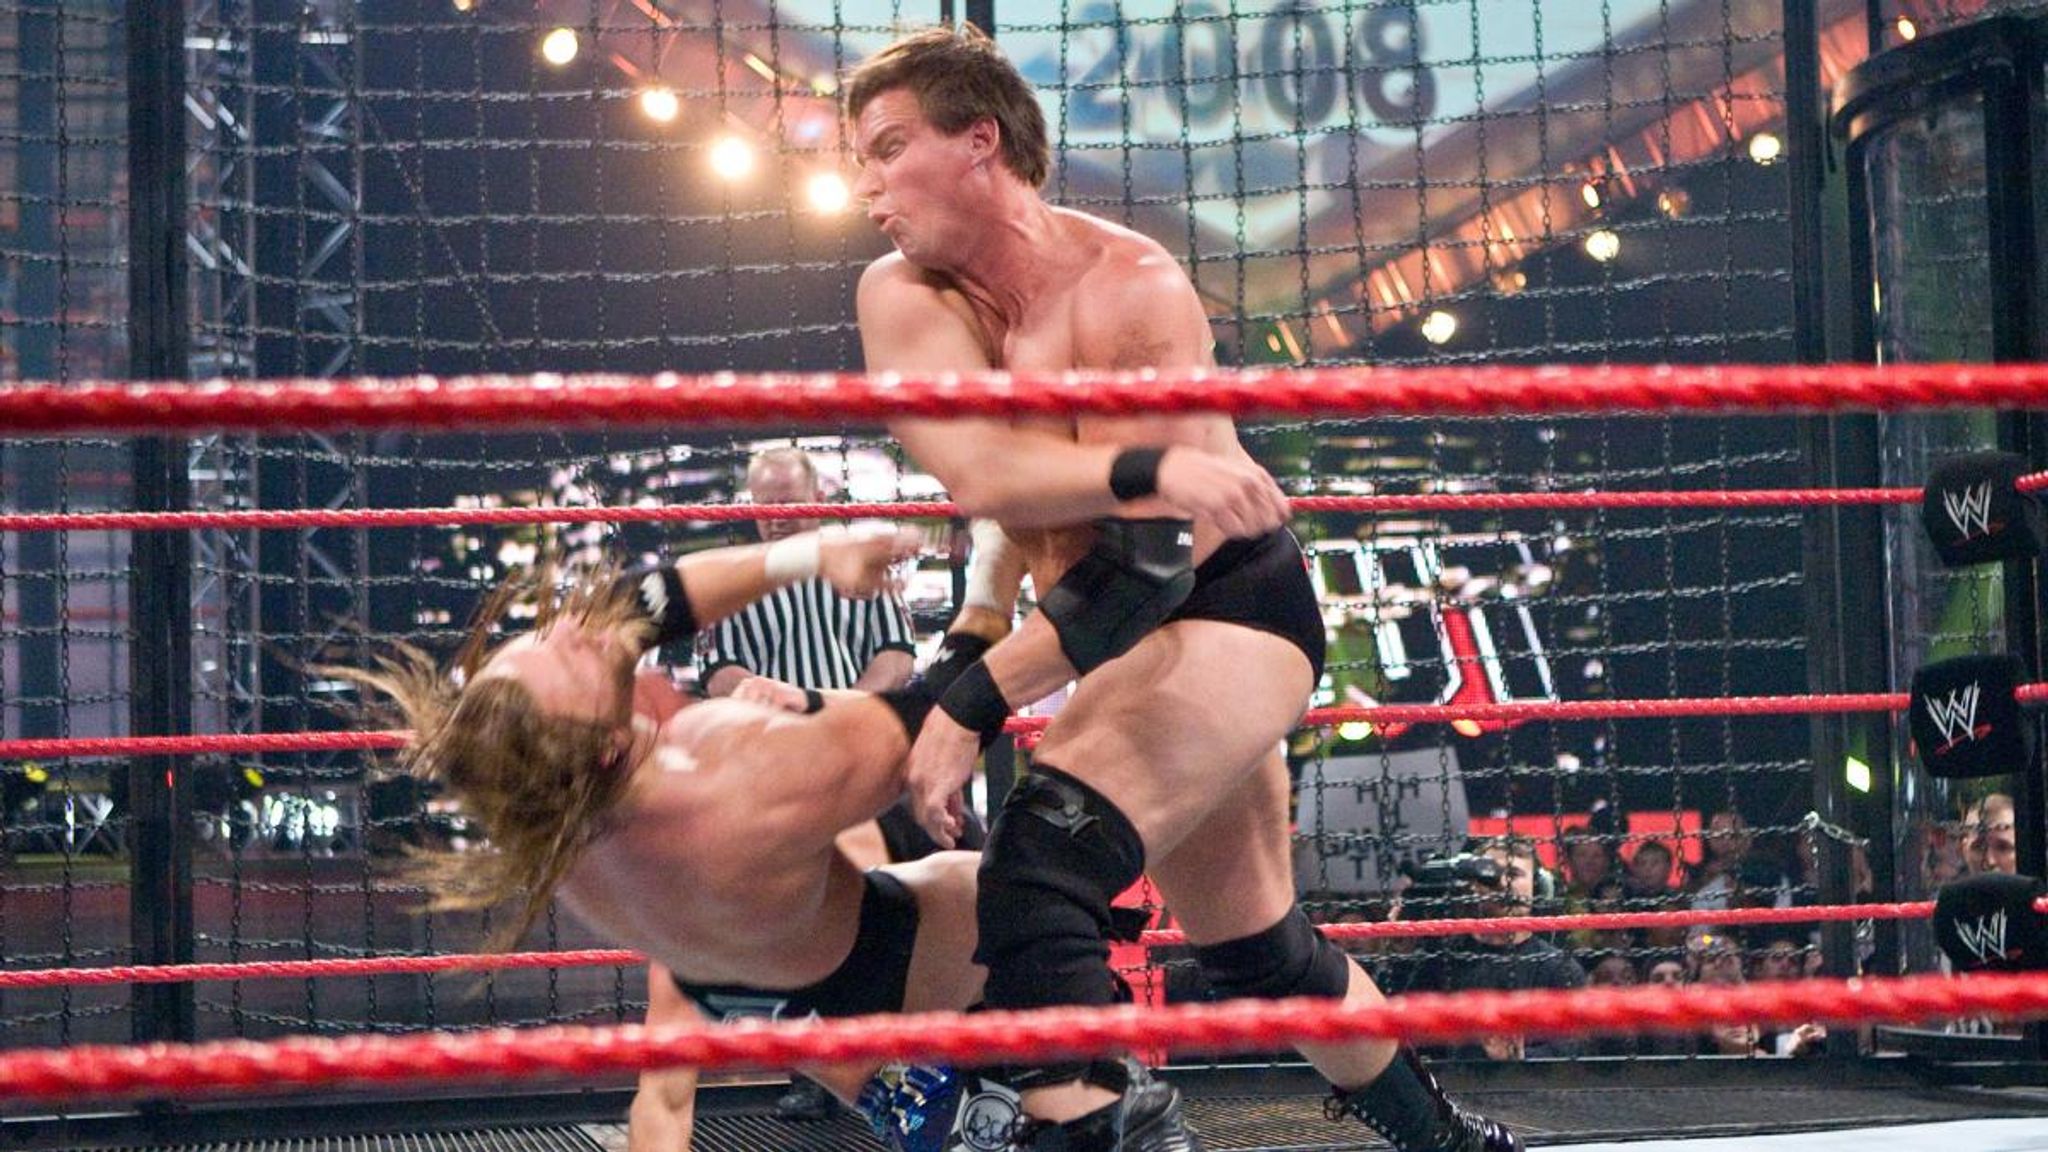 JBL lays out Triple H with a massive Clothesline from Hell.